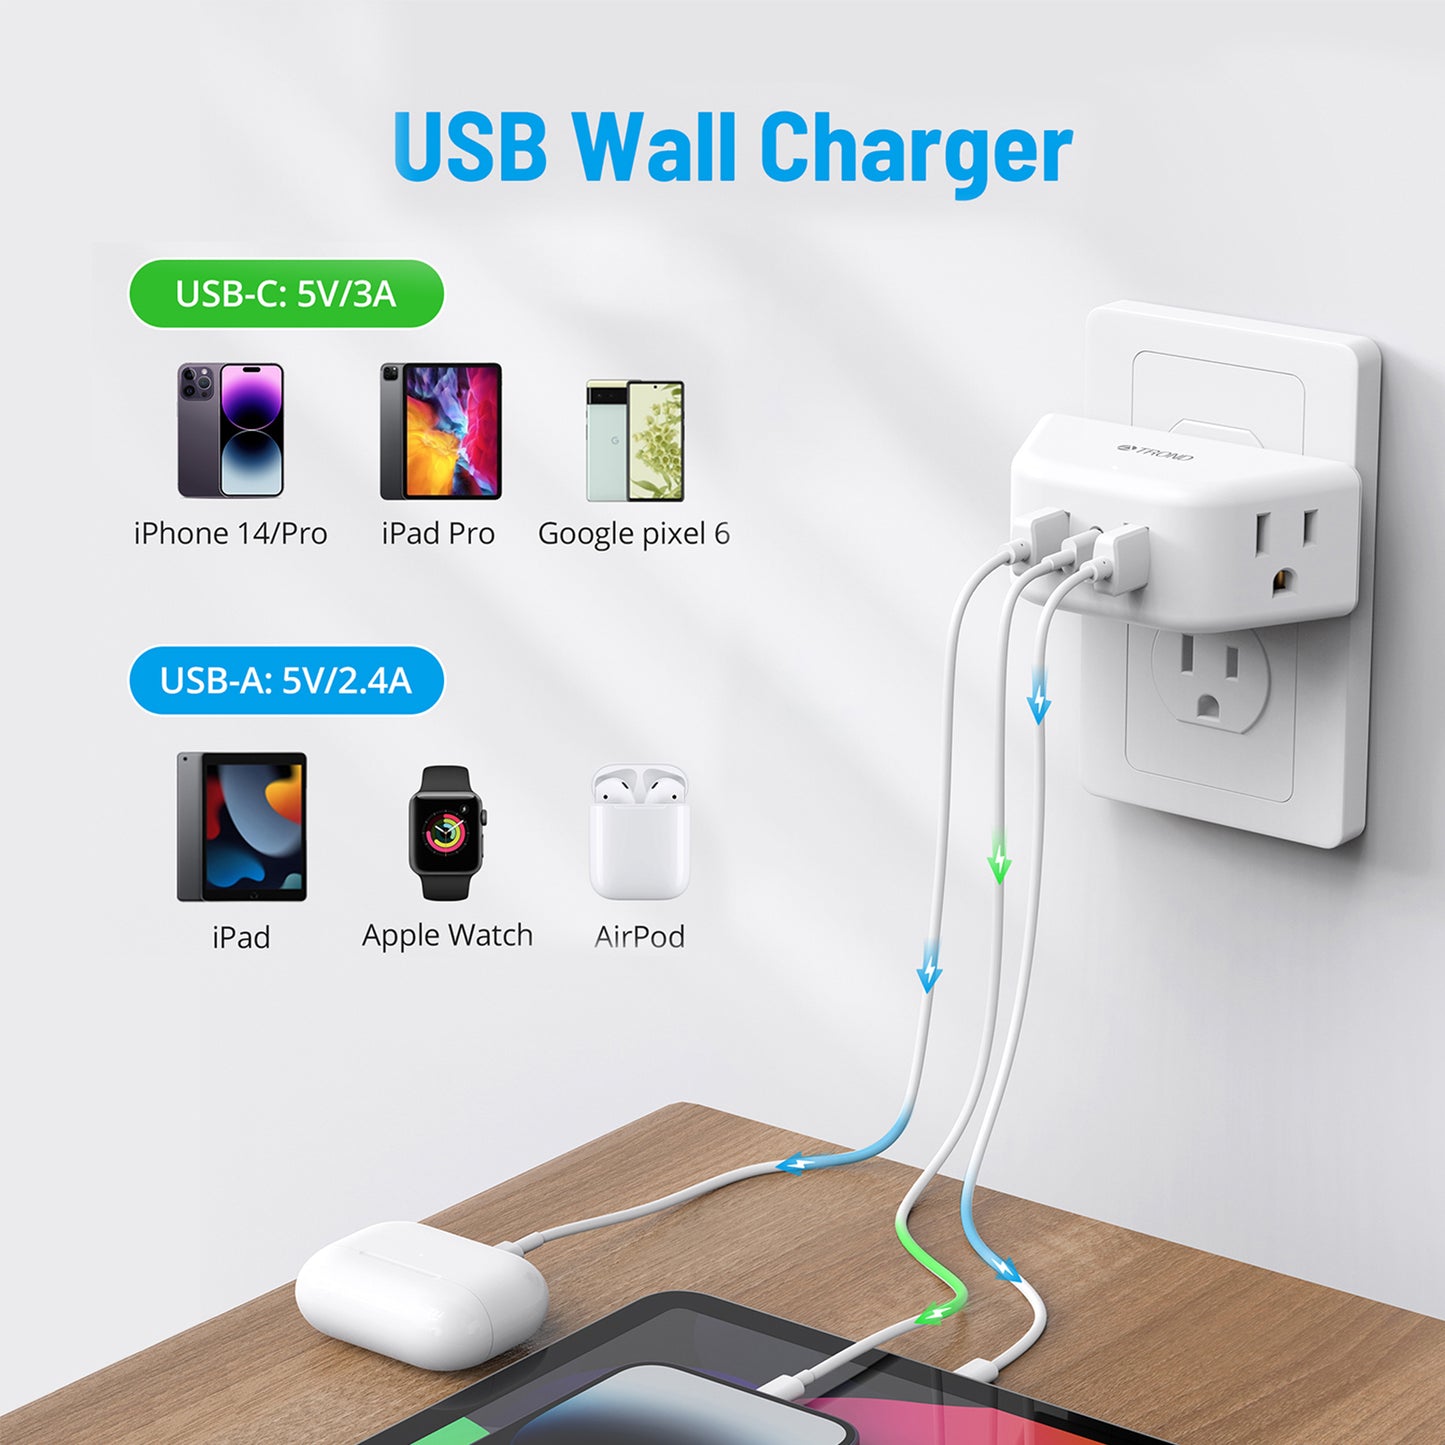 Outlet Extender with USB - TROND Electrical Outlet Splitter